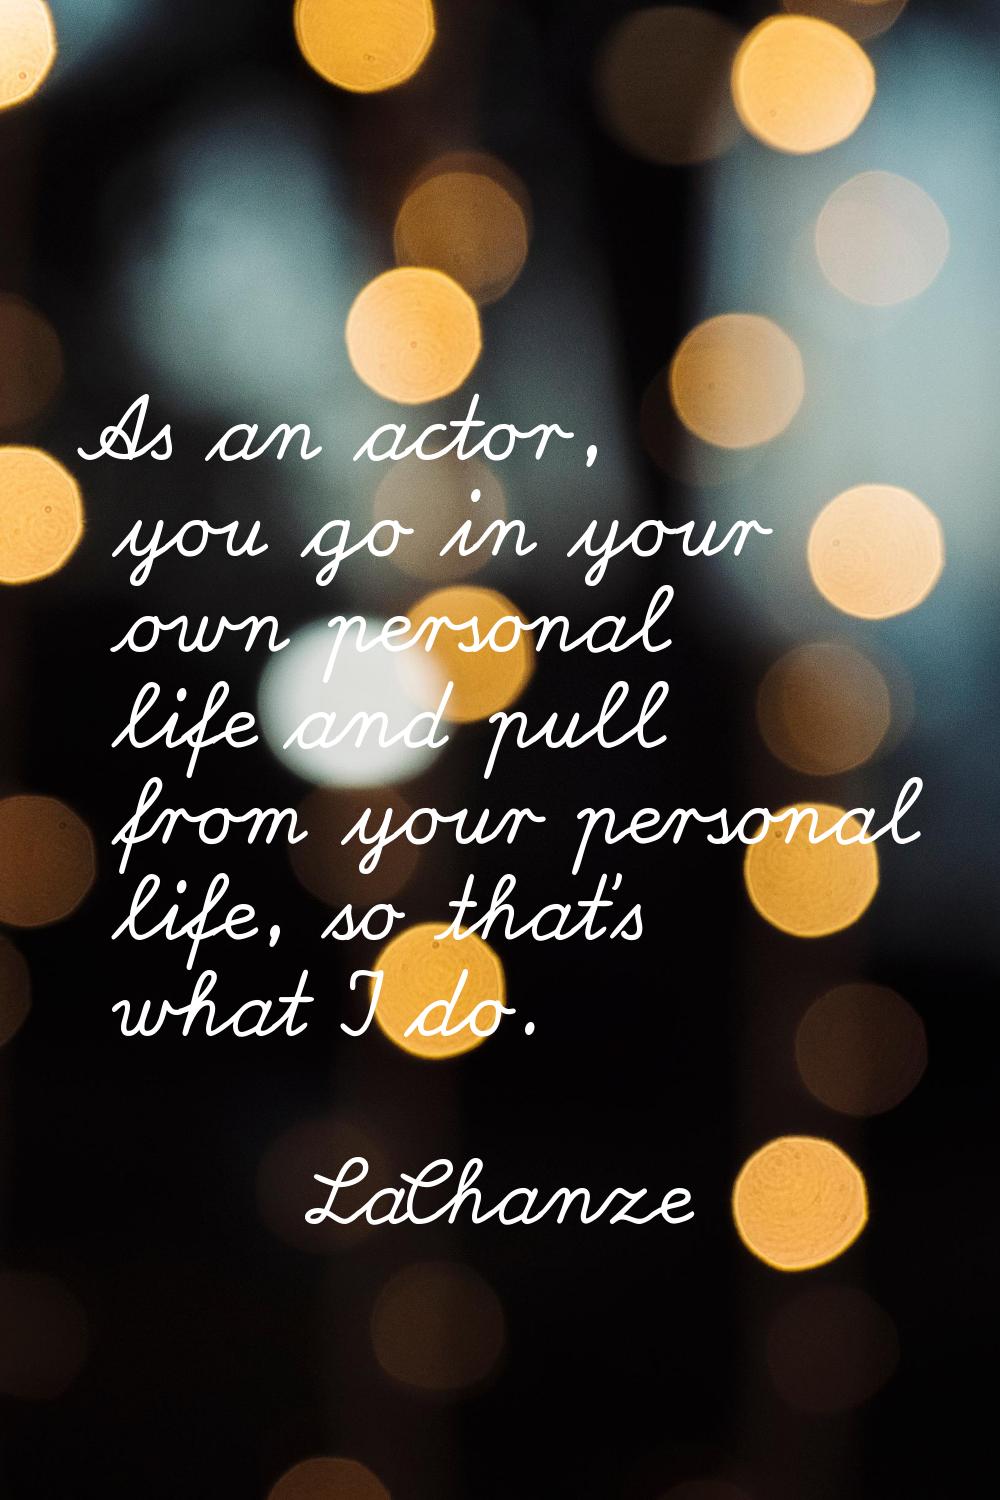 As an actor, you go in your own personal life and pull from your personal life, so that's what I do